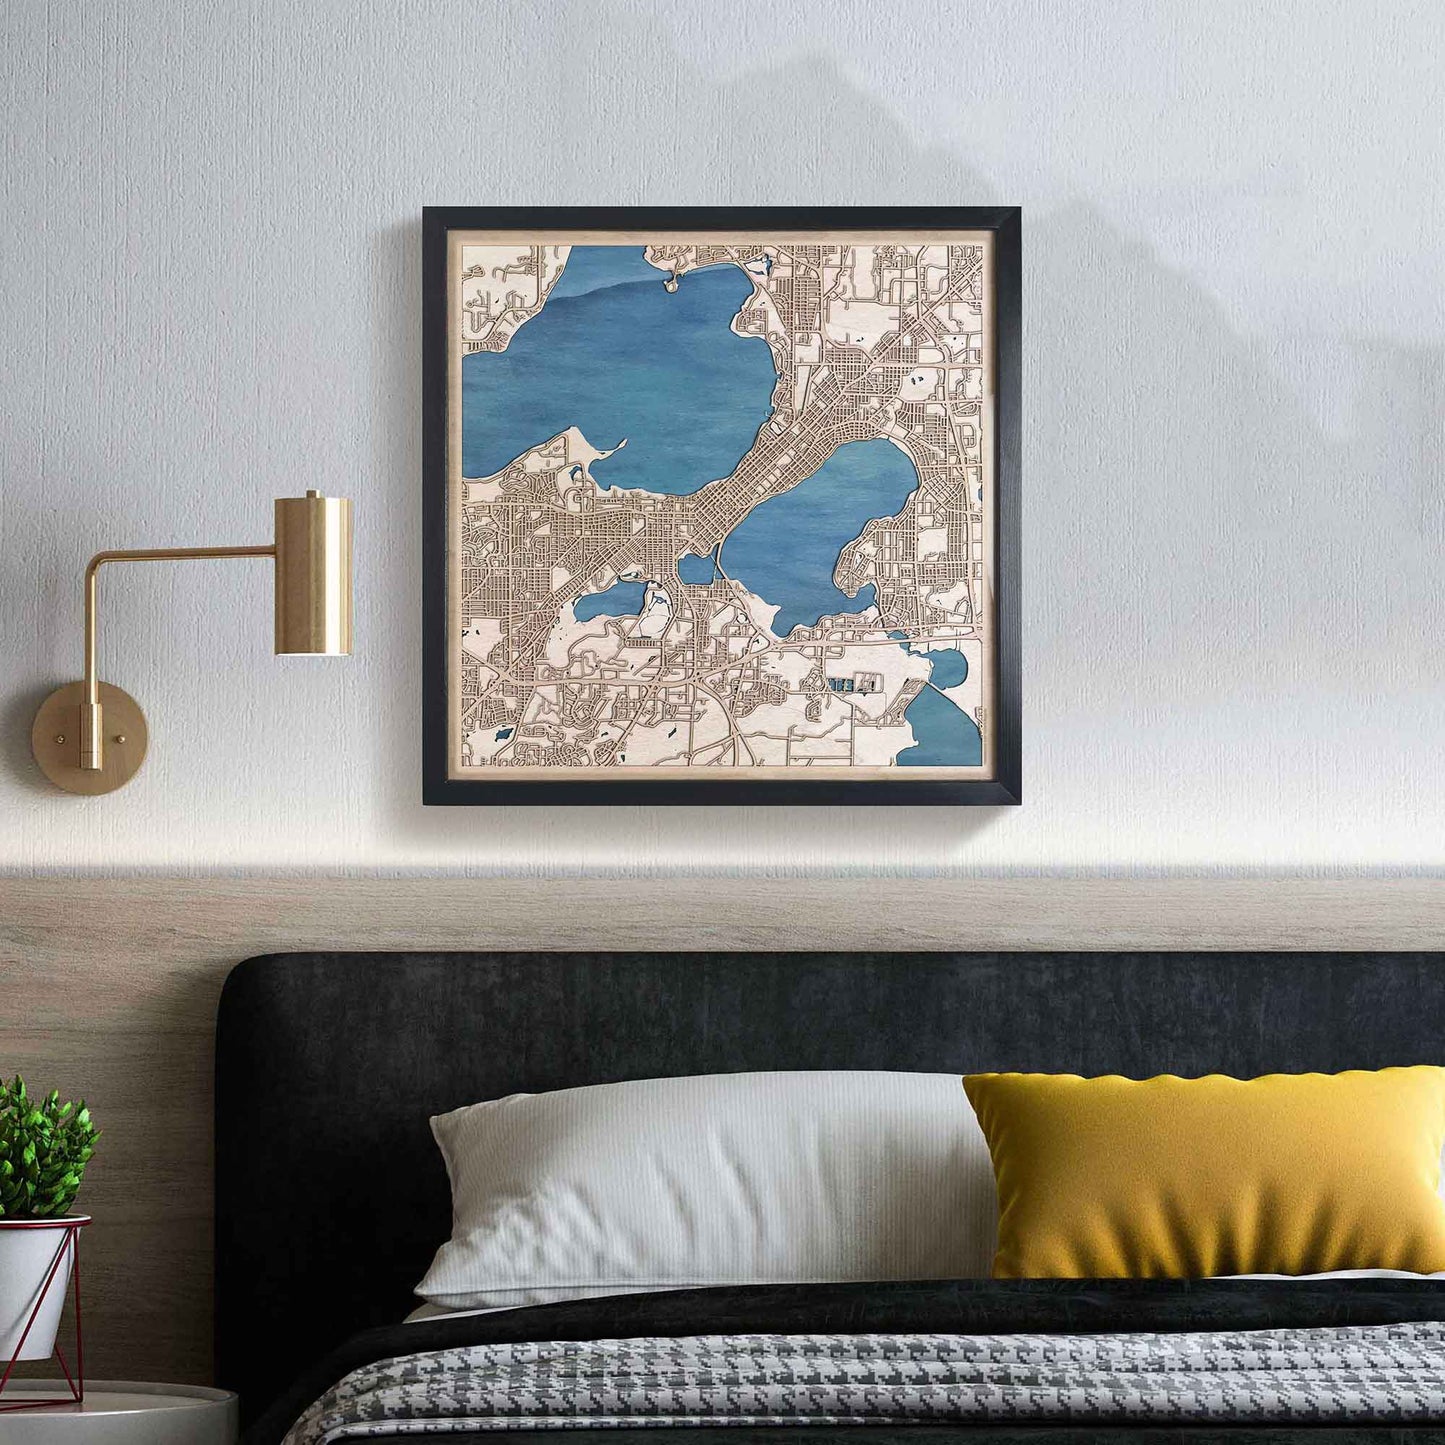 Madison Wooden Map by CityWood - Custom Wood Map Art - Unique Laser Cut Engraved - Anniversary Gift